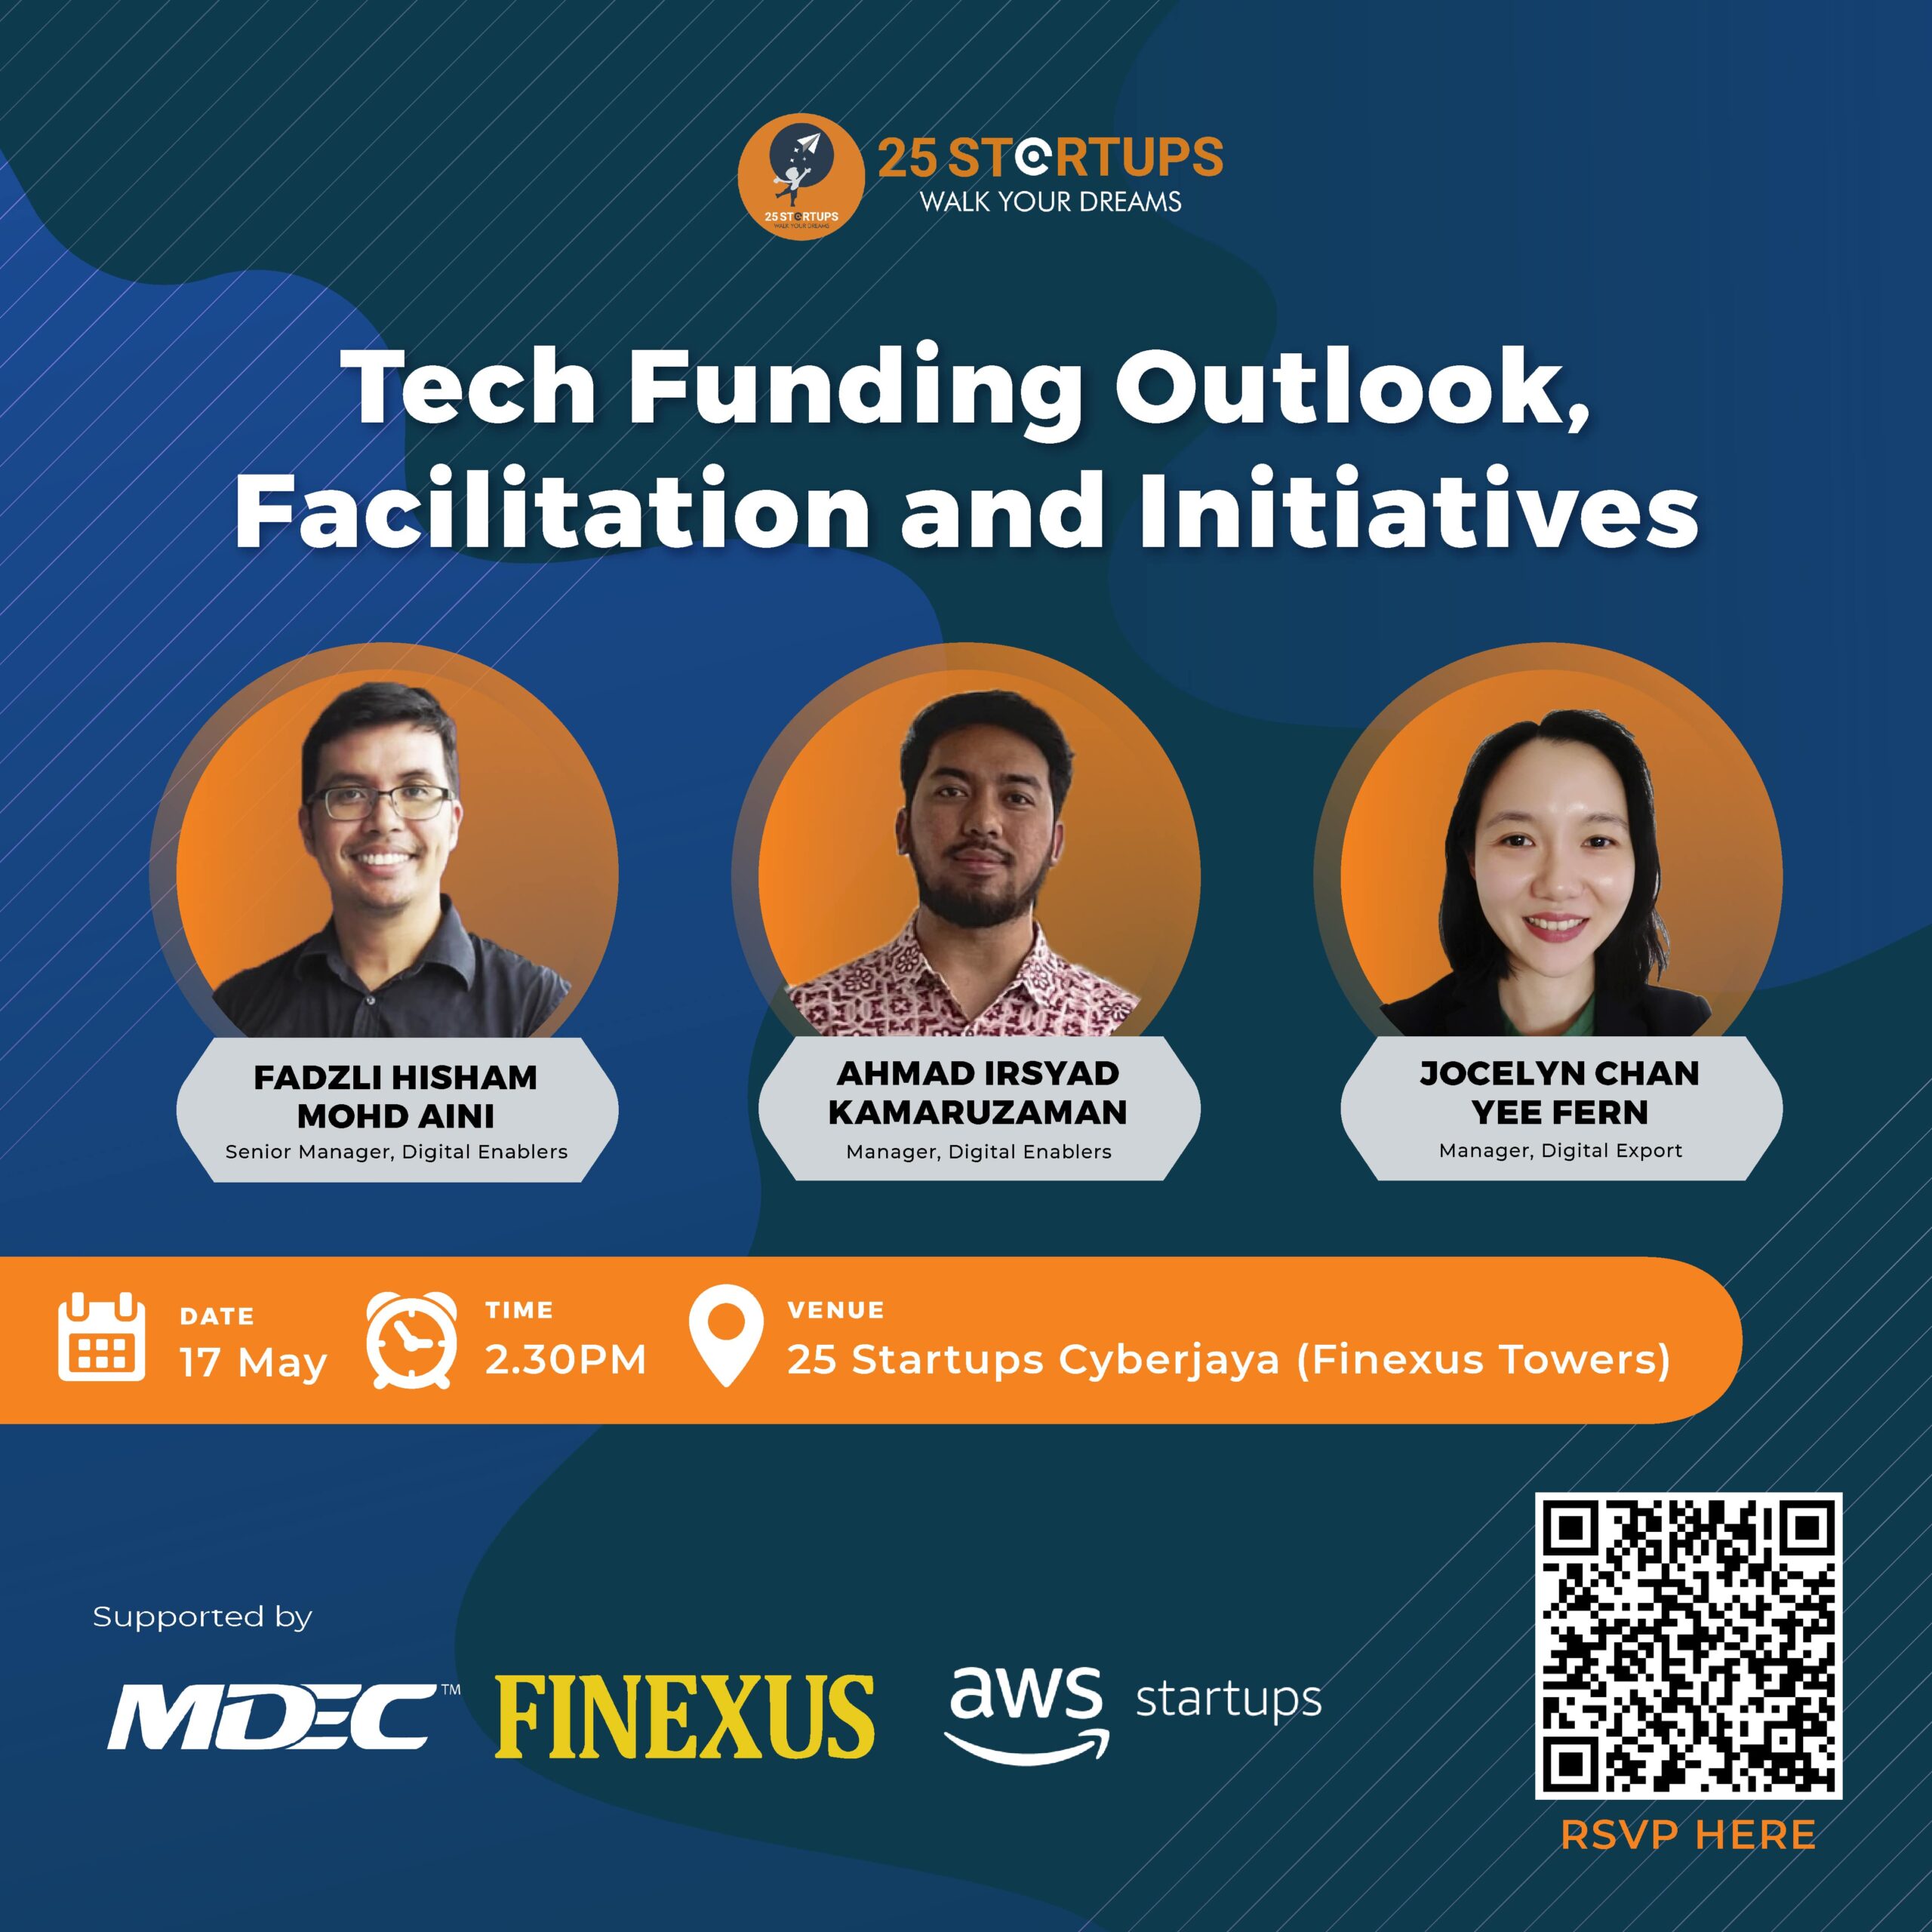 Tech Funding Outlook, Facilitation and Initiatives